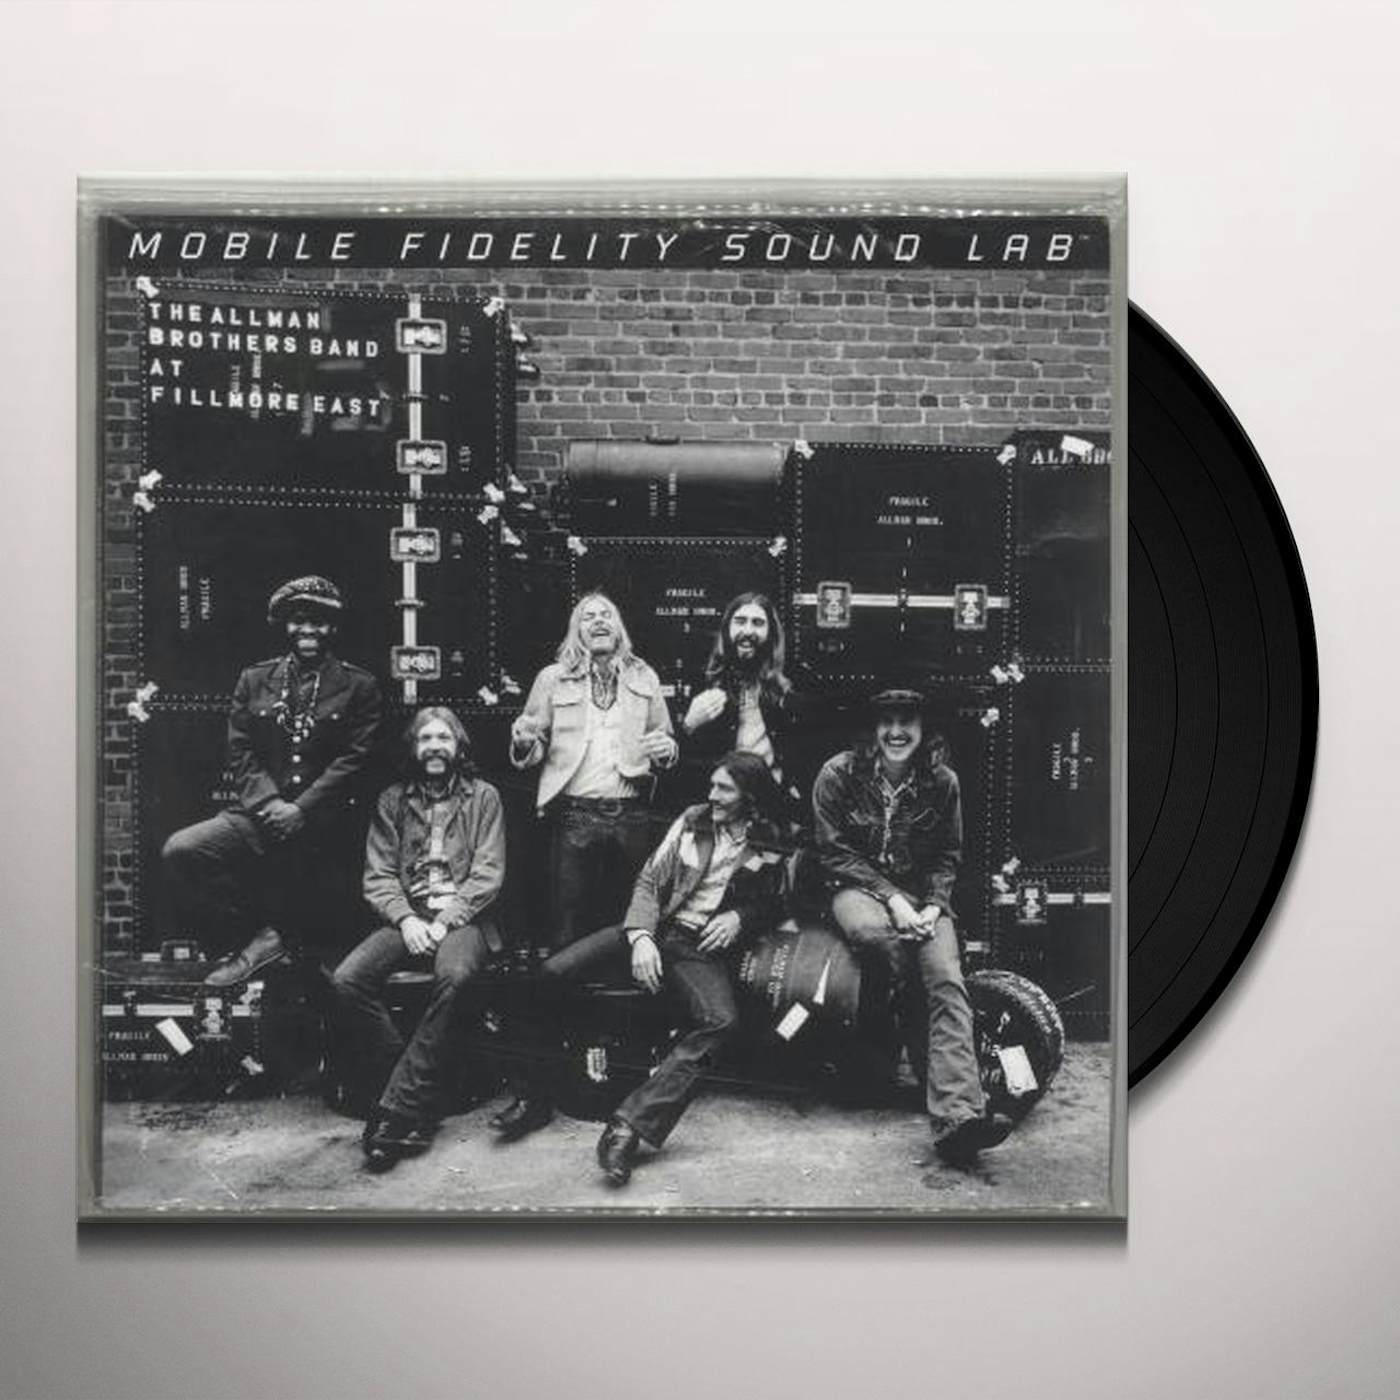 Allman Brothers Band LIVE AT FILLMORE EAST Vinyl Record